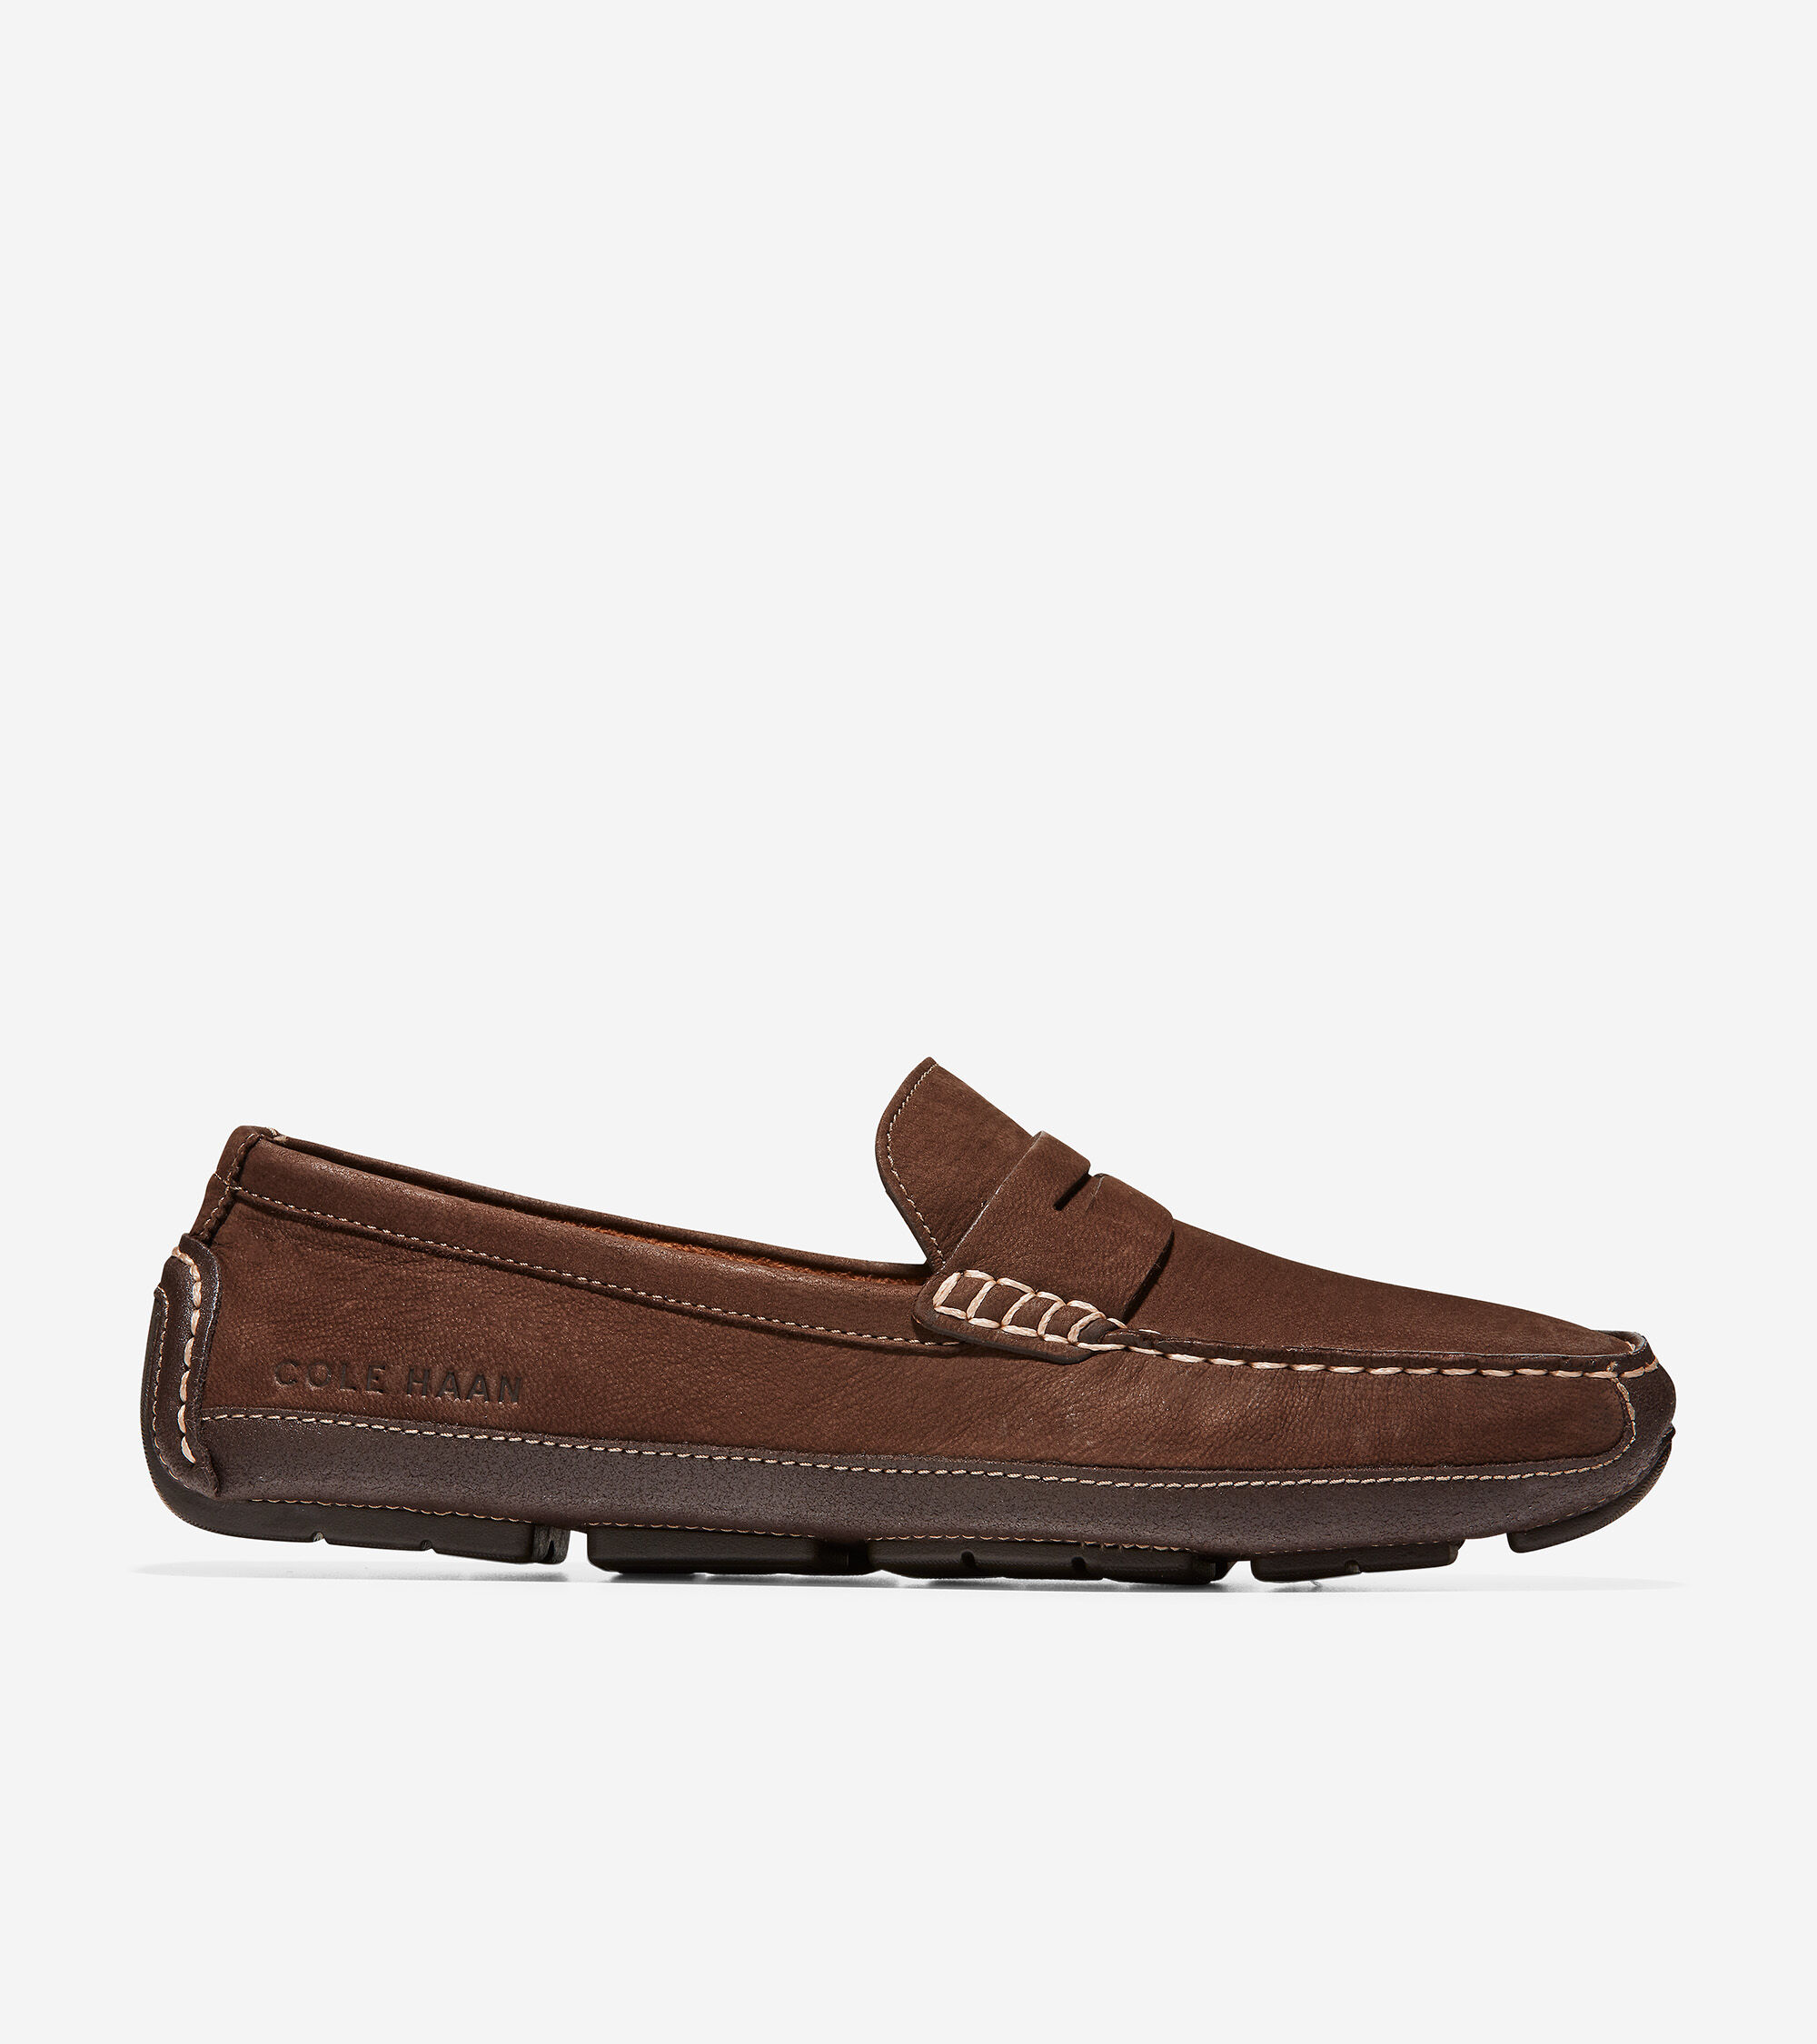 Men's Loafers \u0026 Driving Shoes | Cole Haan